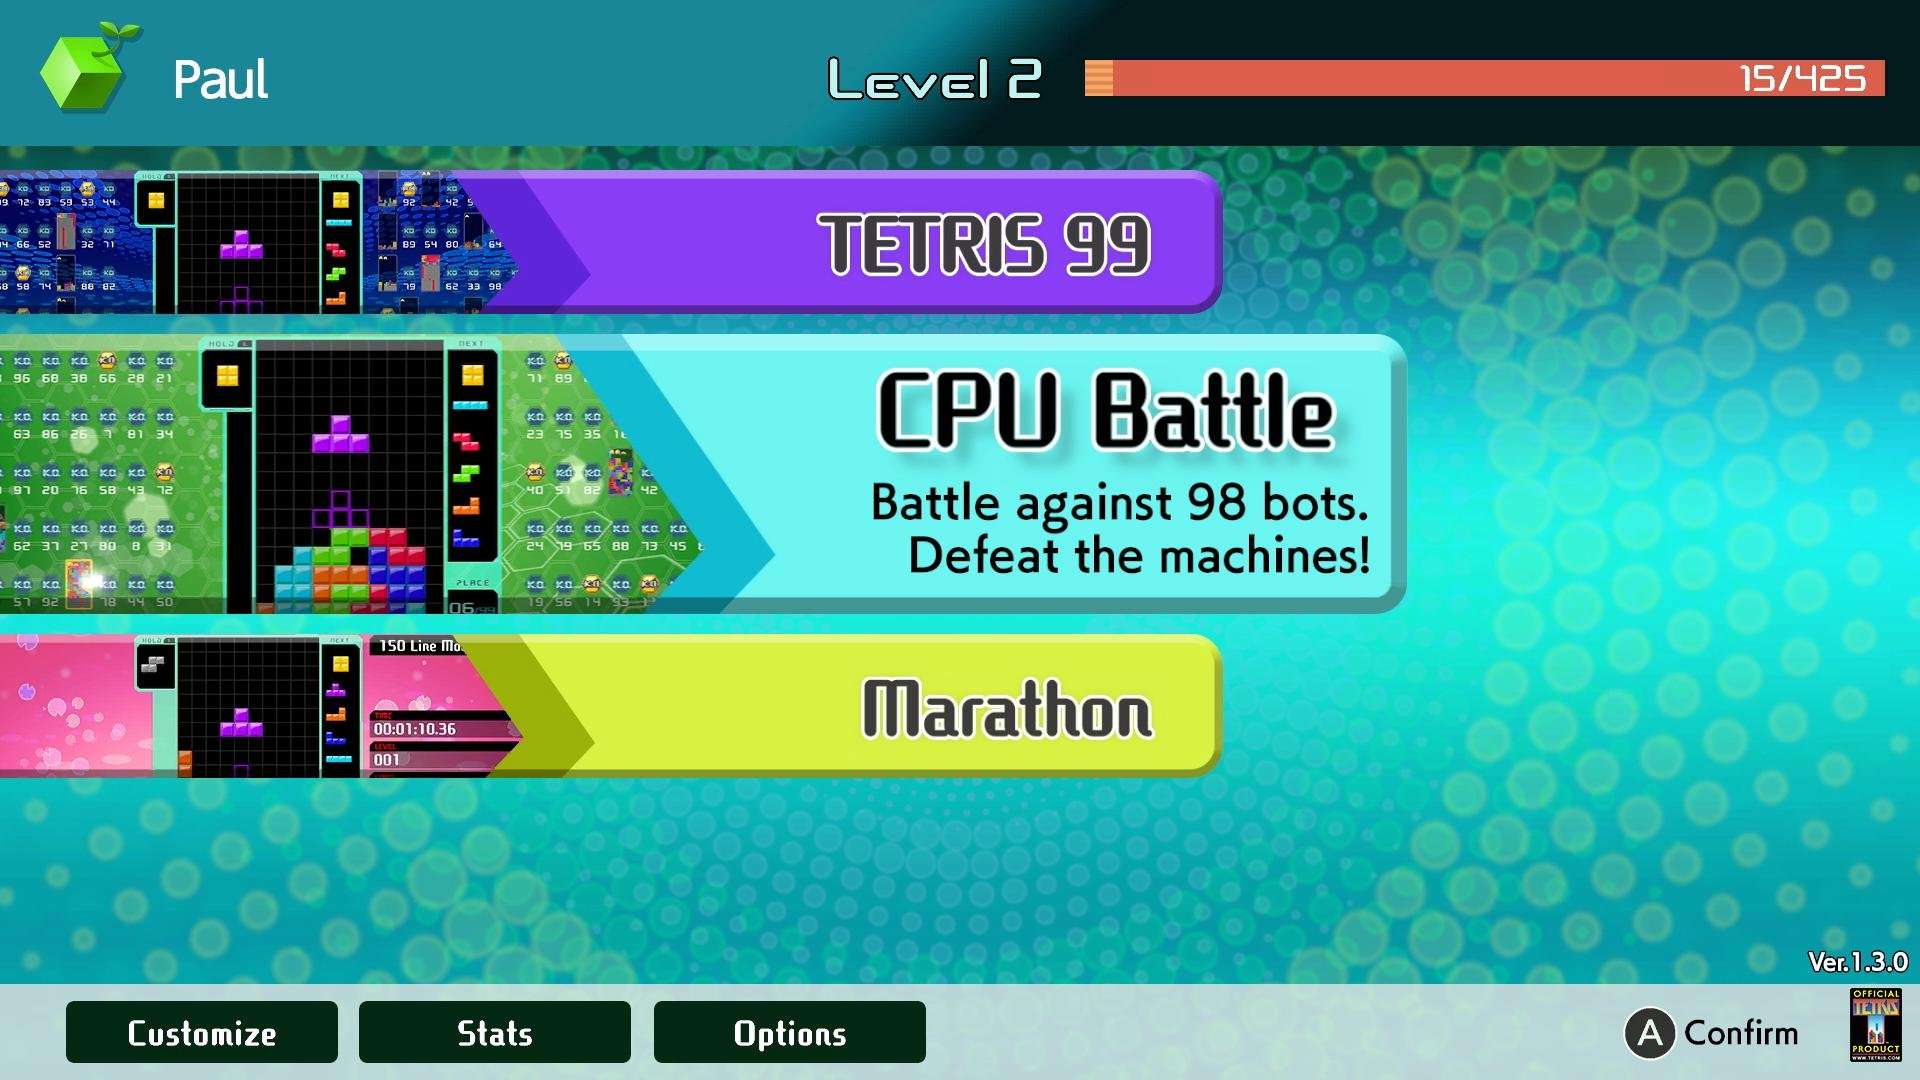 image for Nintendo of America auf Twitter: "The #Tetris99 Big Block DLC is available on Nintendo eShop for $9.99 and adds offline modes! Battle 98 bots in CPU Battle, and survive in Marathon mode to clear the m